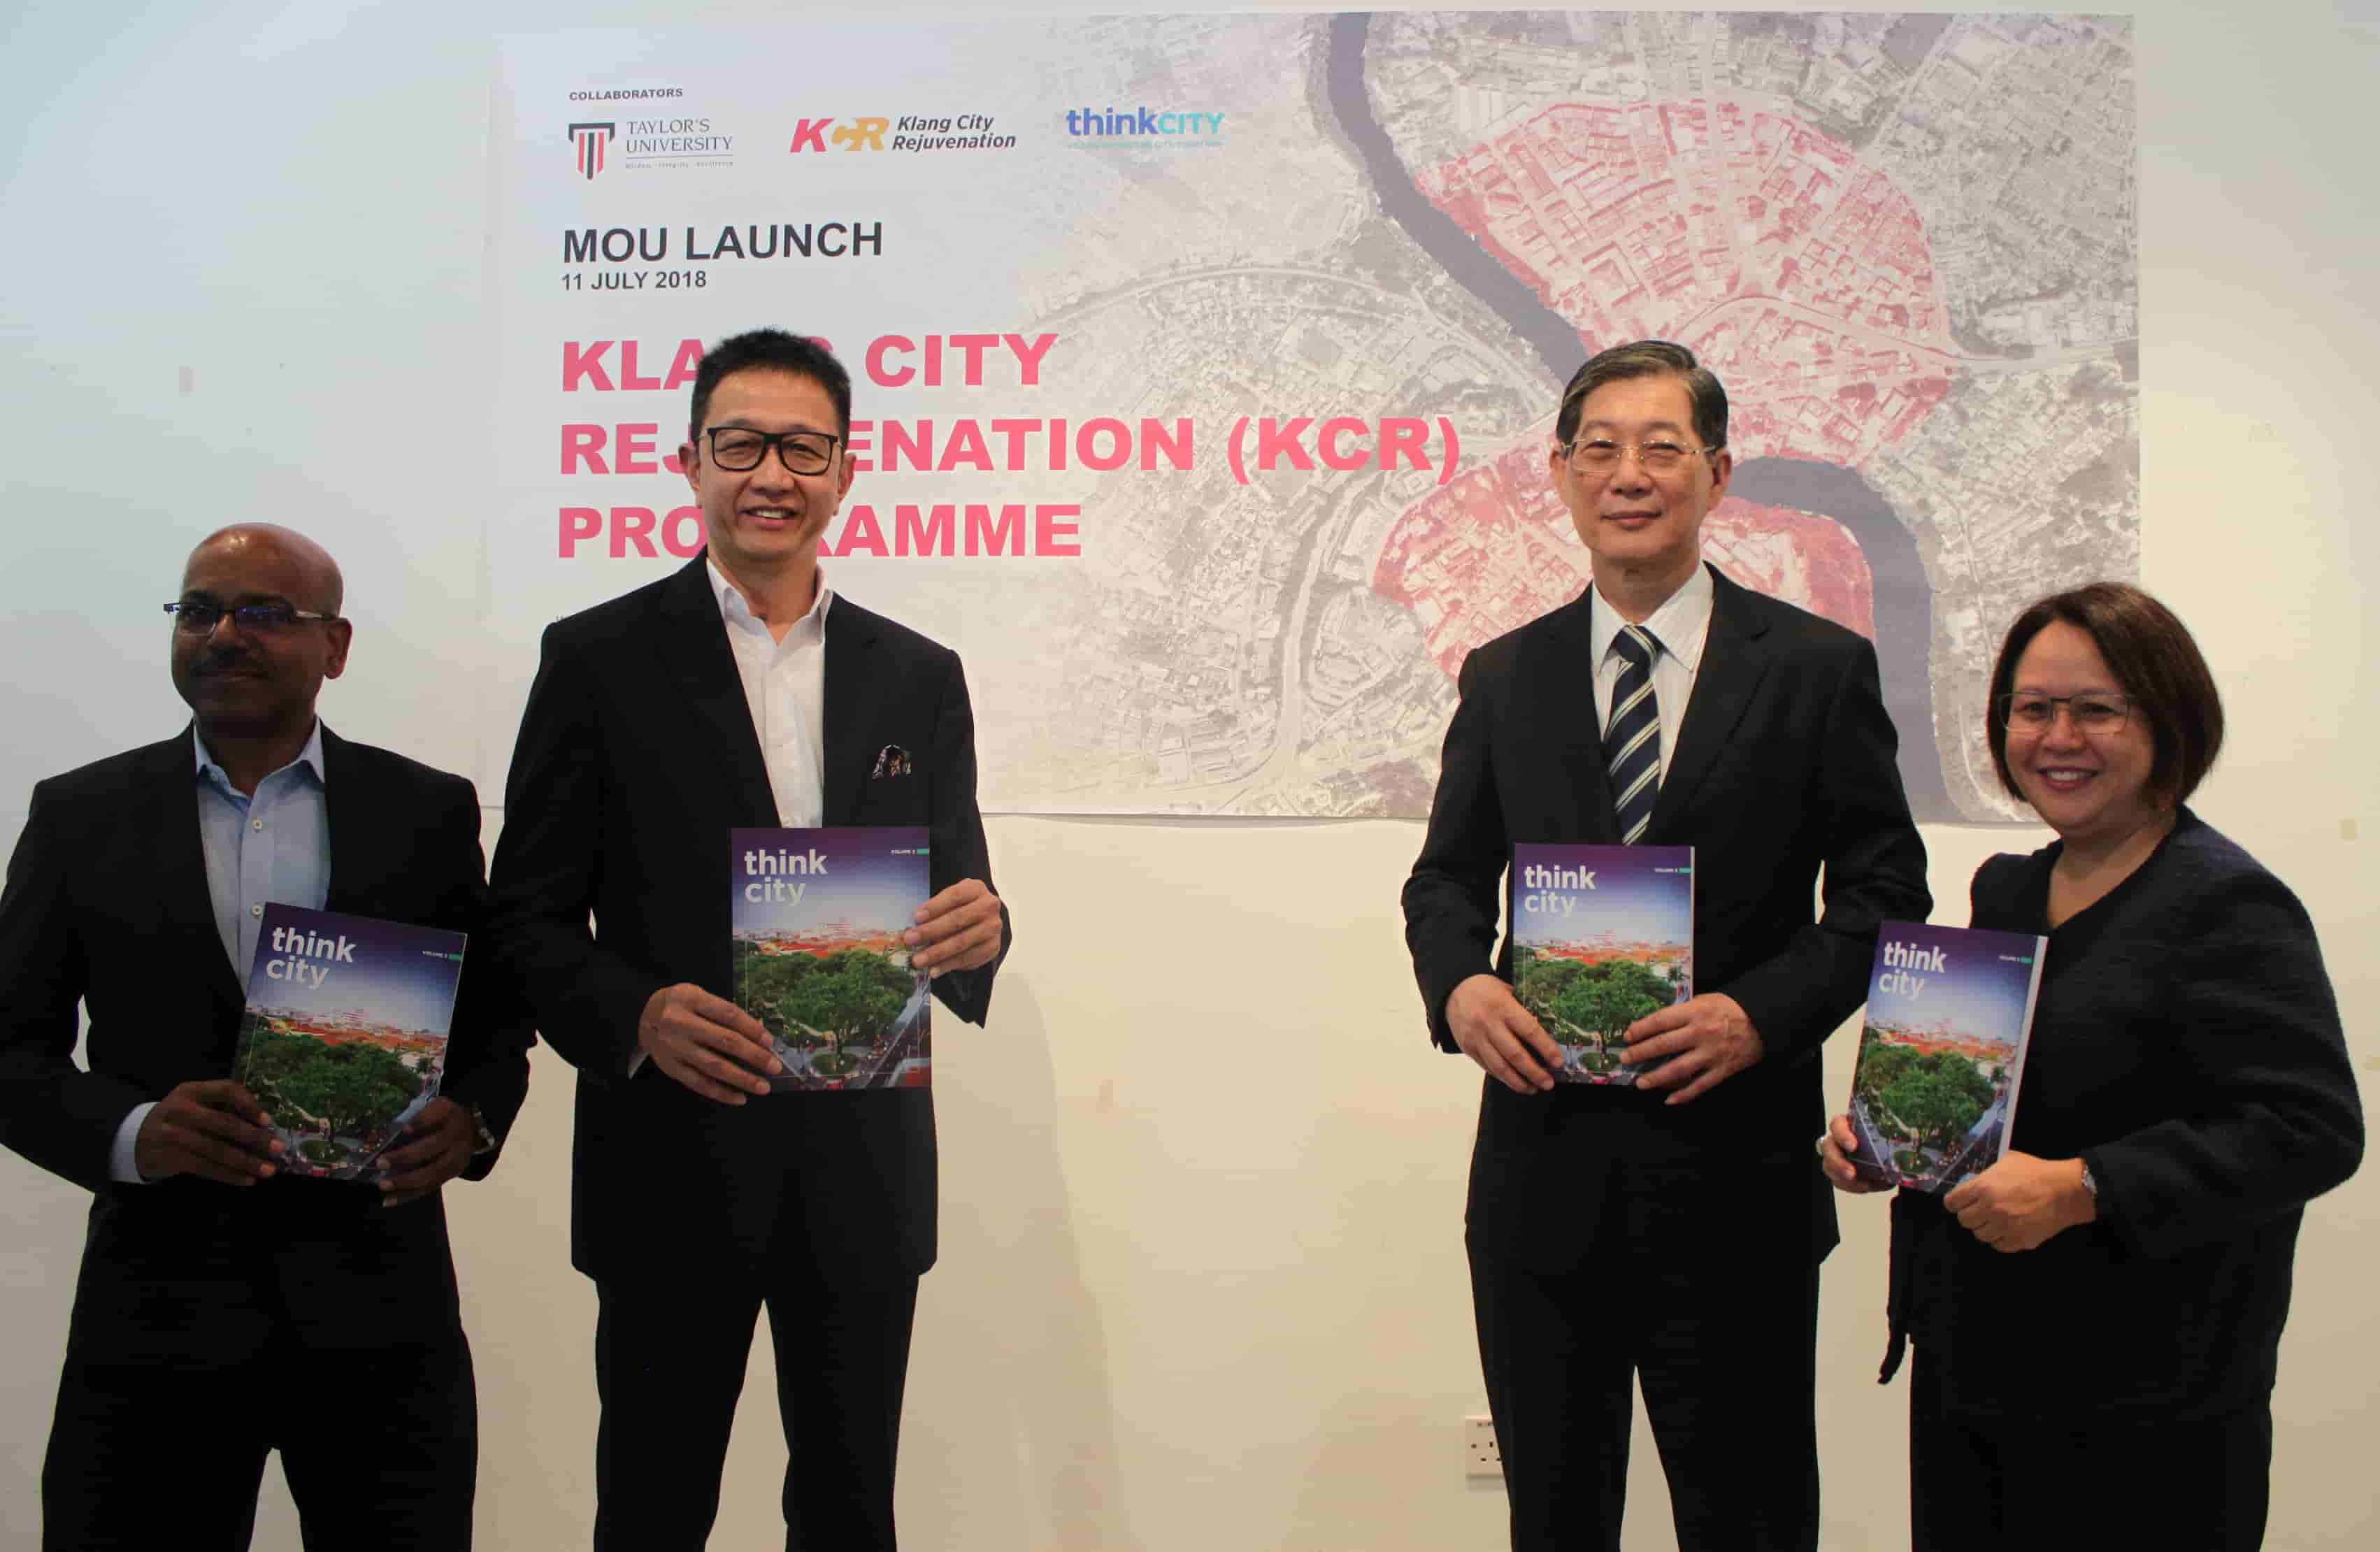 The Klang City Rejuvenation programme aims to inject new life into Klang through urban design planning